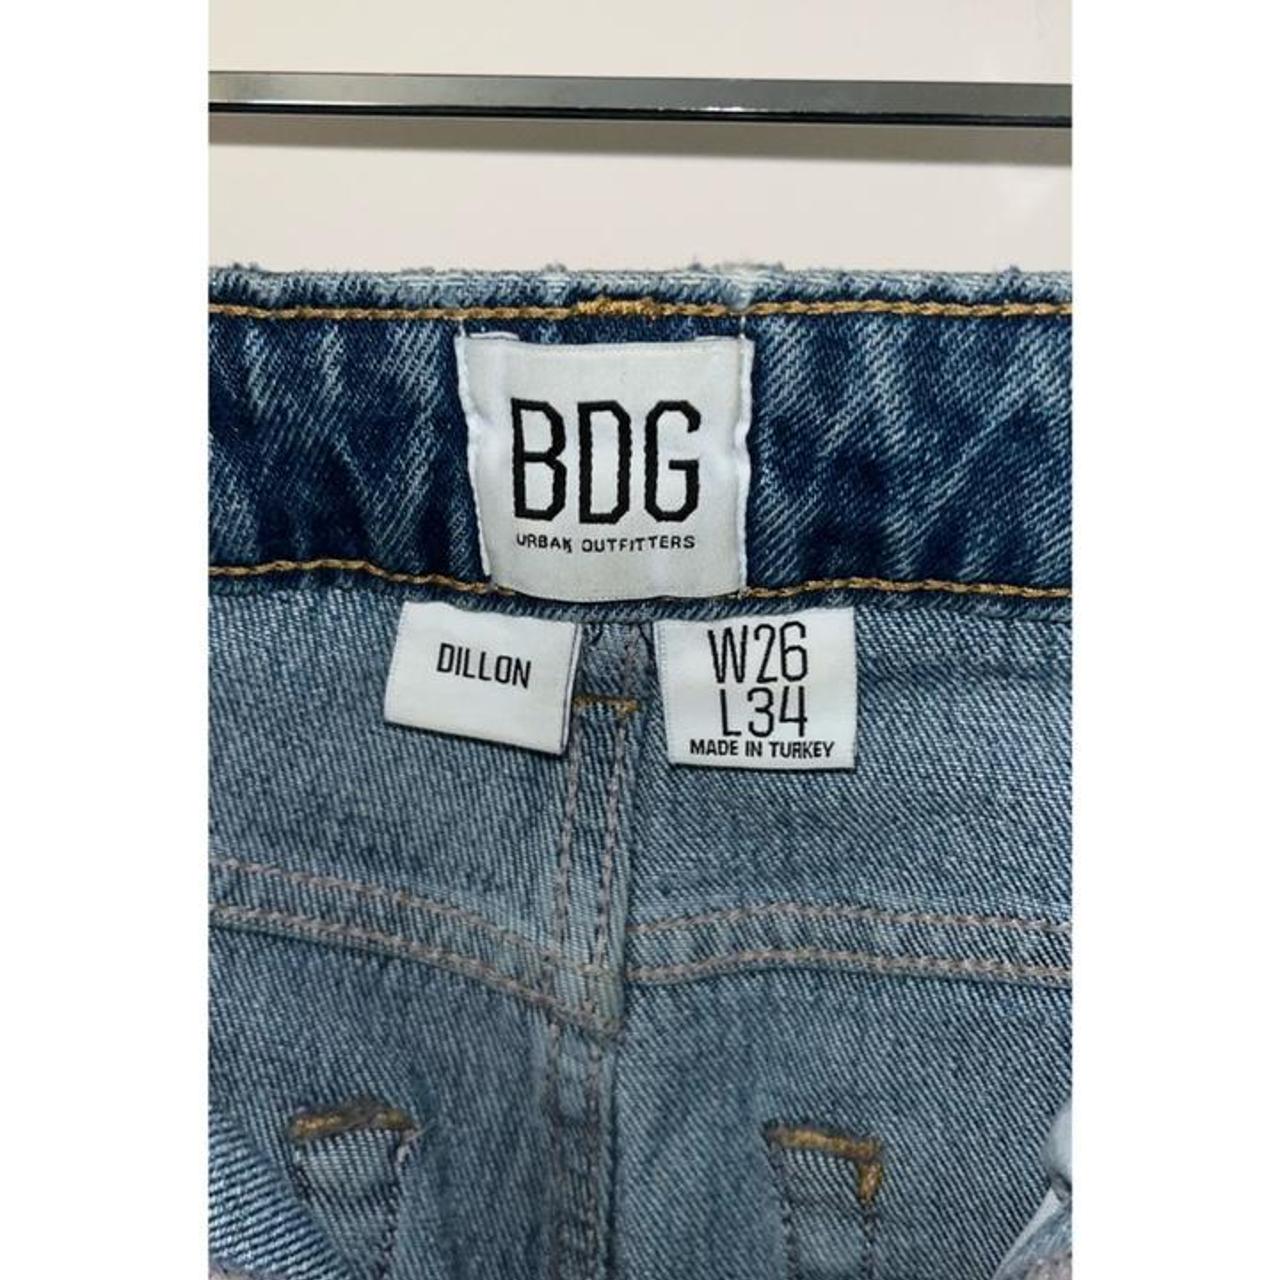 Urban Outfitters BDG Dillon Light Wash Recycled... - Depop